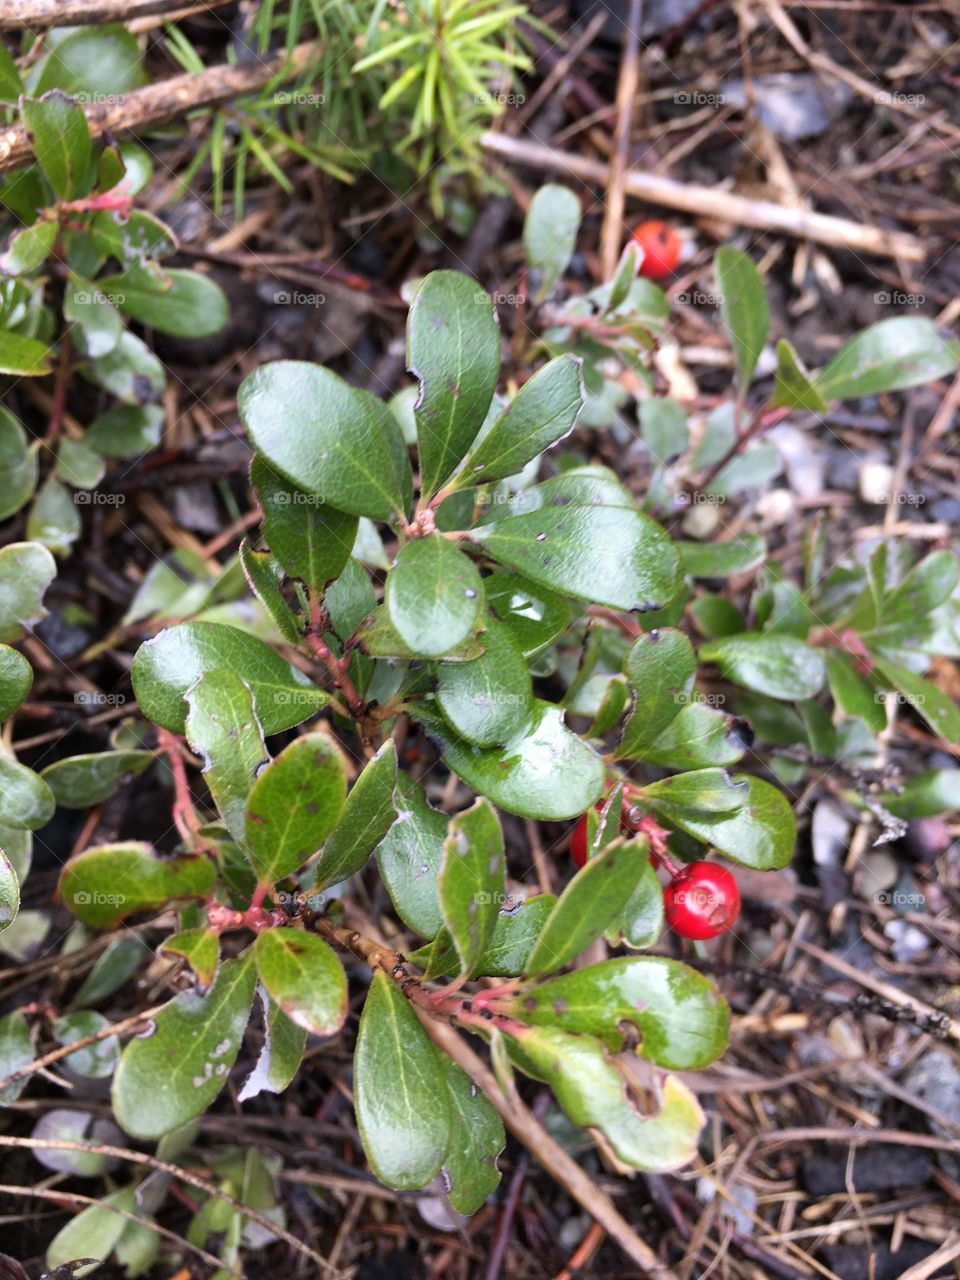 A small ground plant with red berries